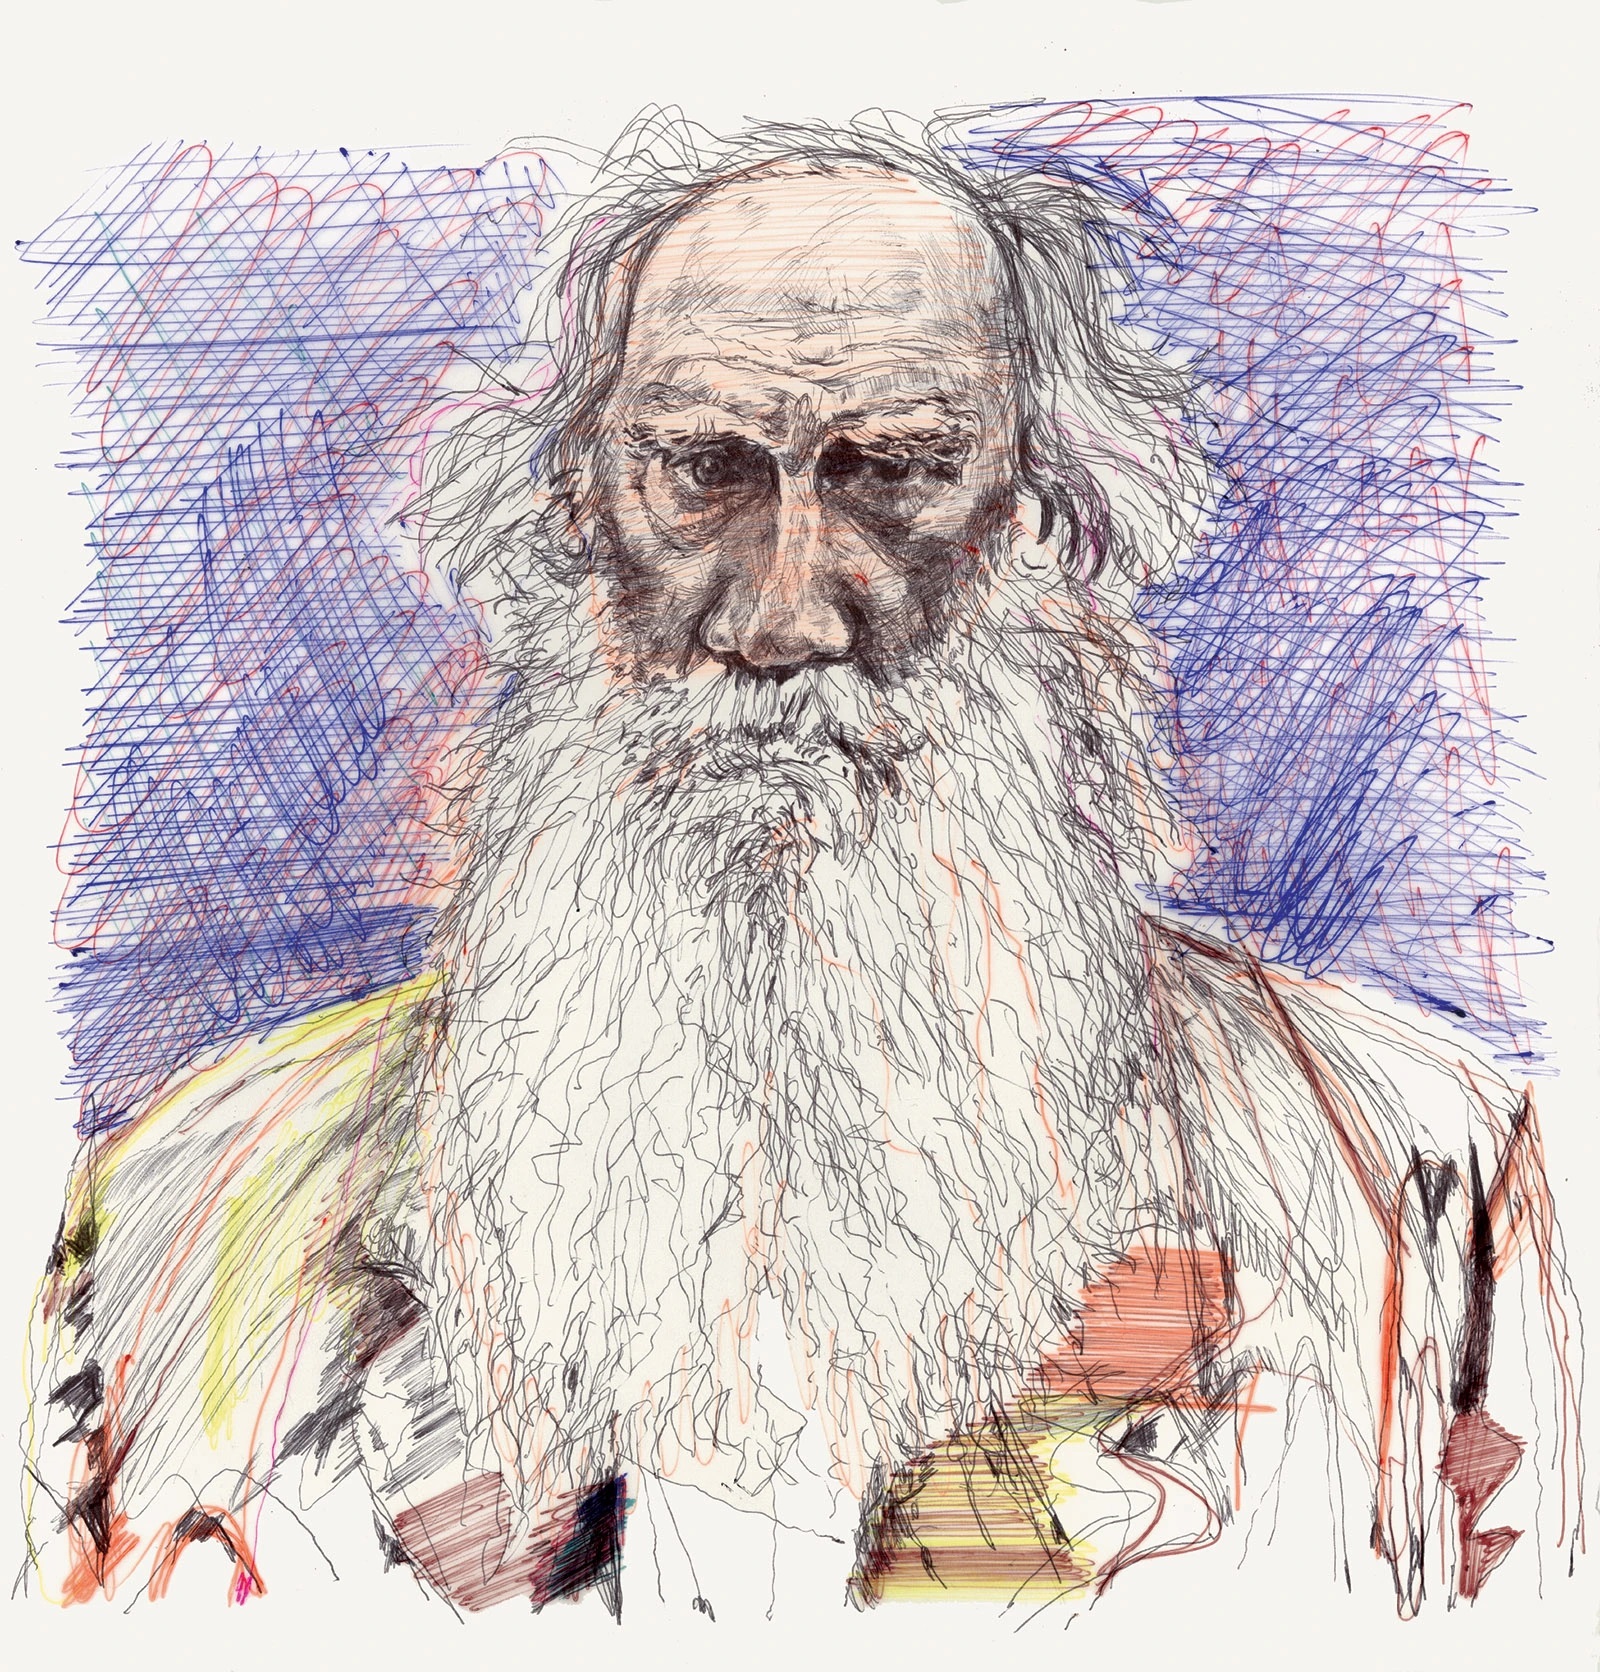 Leo Tolstoy by Yann Kebbi courtesy of NYReview